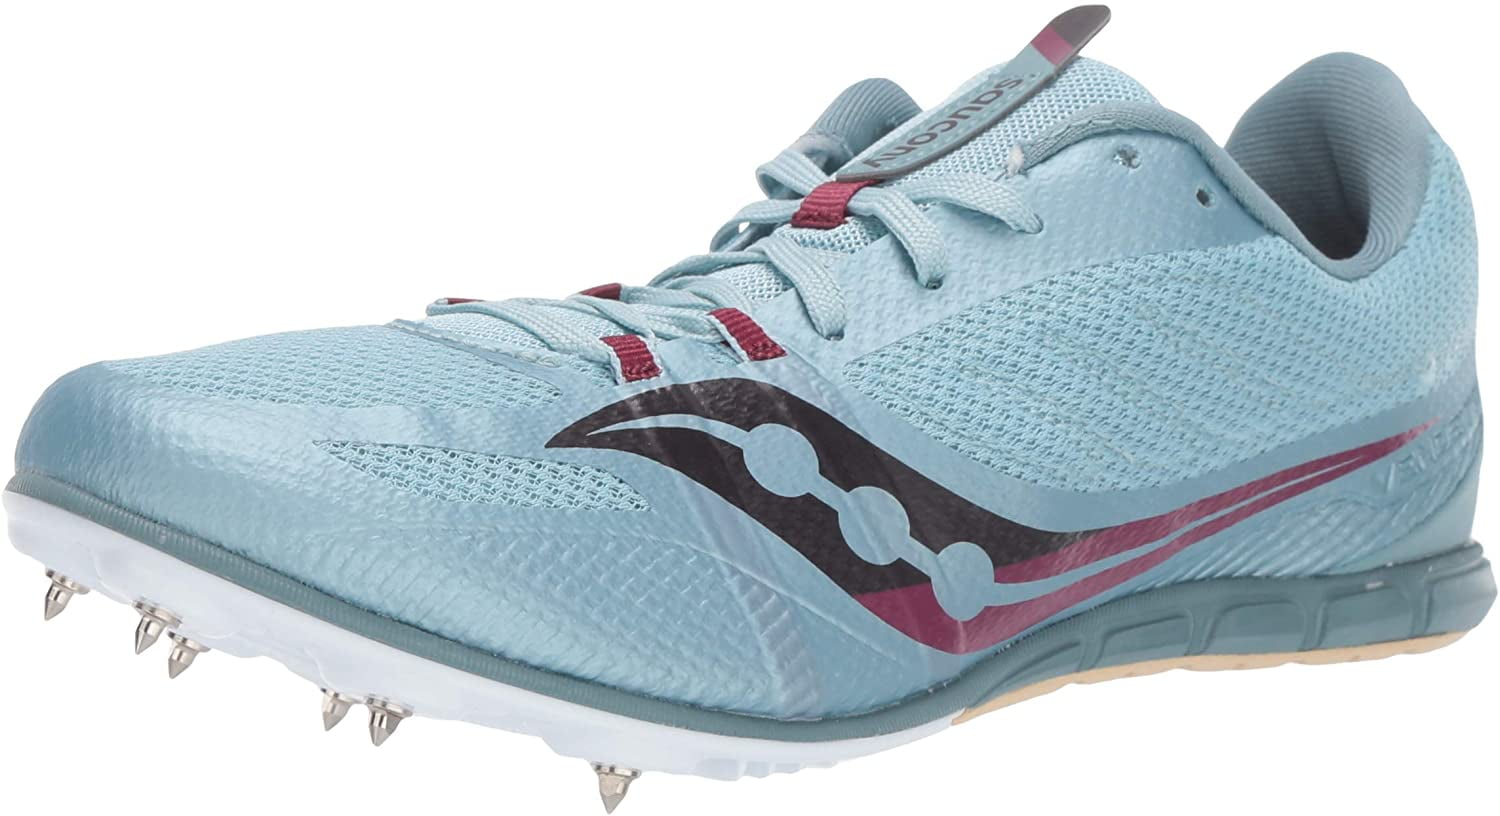 Saucony Women's Velocity 4 Track & Field Shoes/Spikes •Black/Blue•